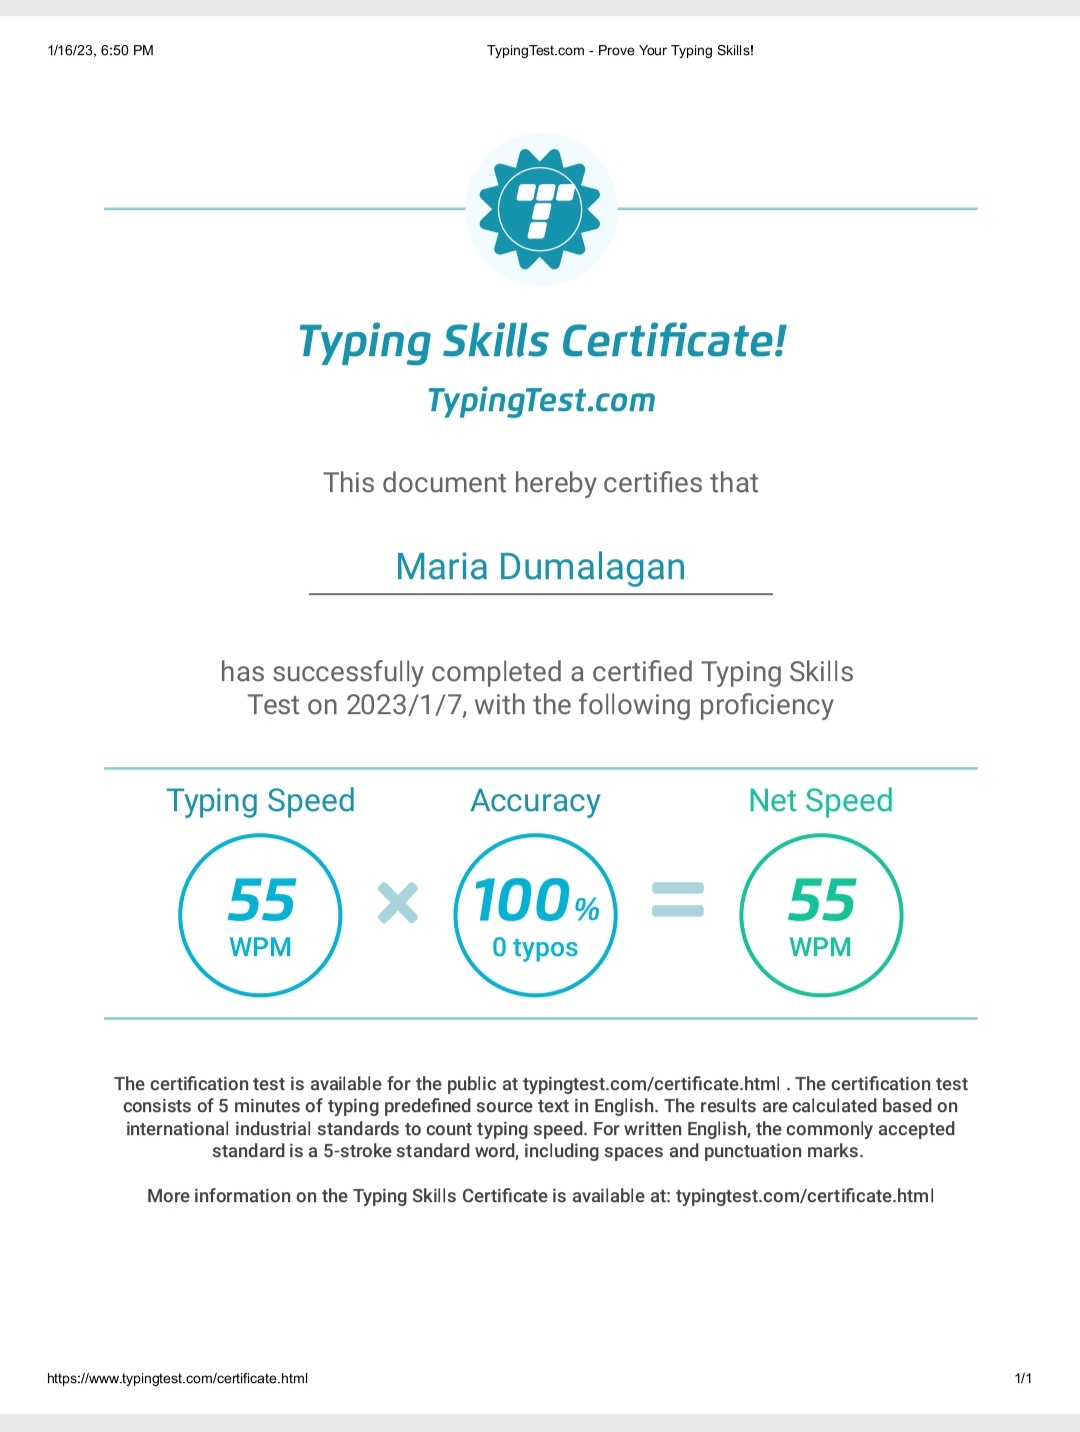 Typing Skills Certificates & Results